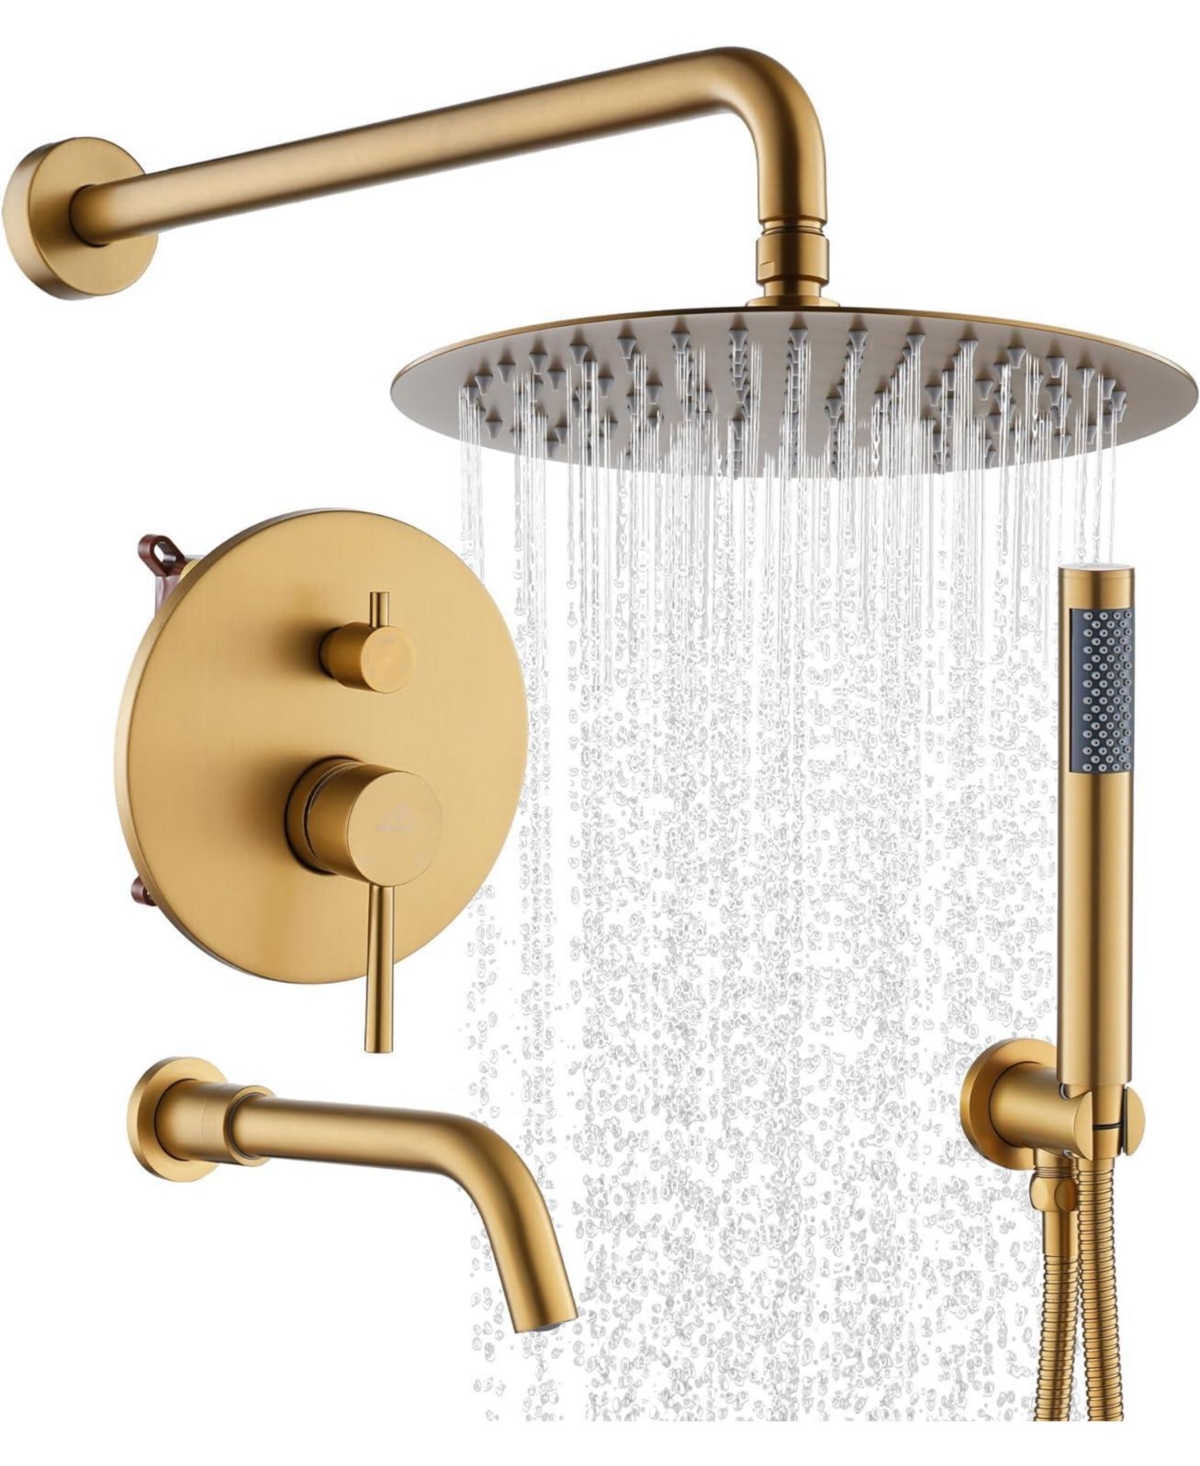 10" Inch Wall Mounted Round Shower System Set with Handheld Spray & Tub Spout - Brushed nickel